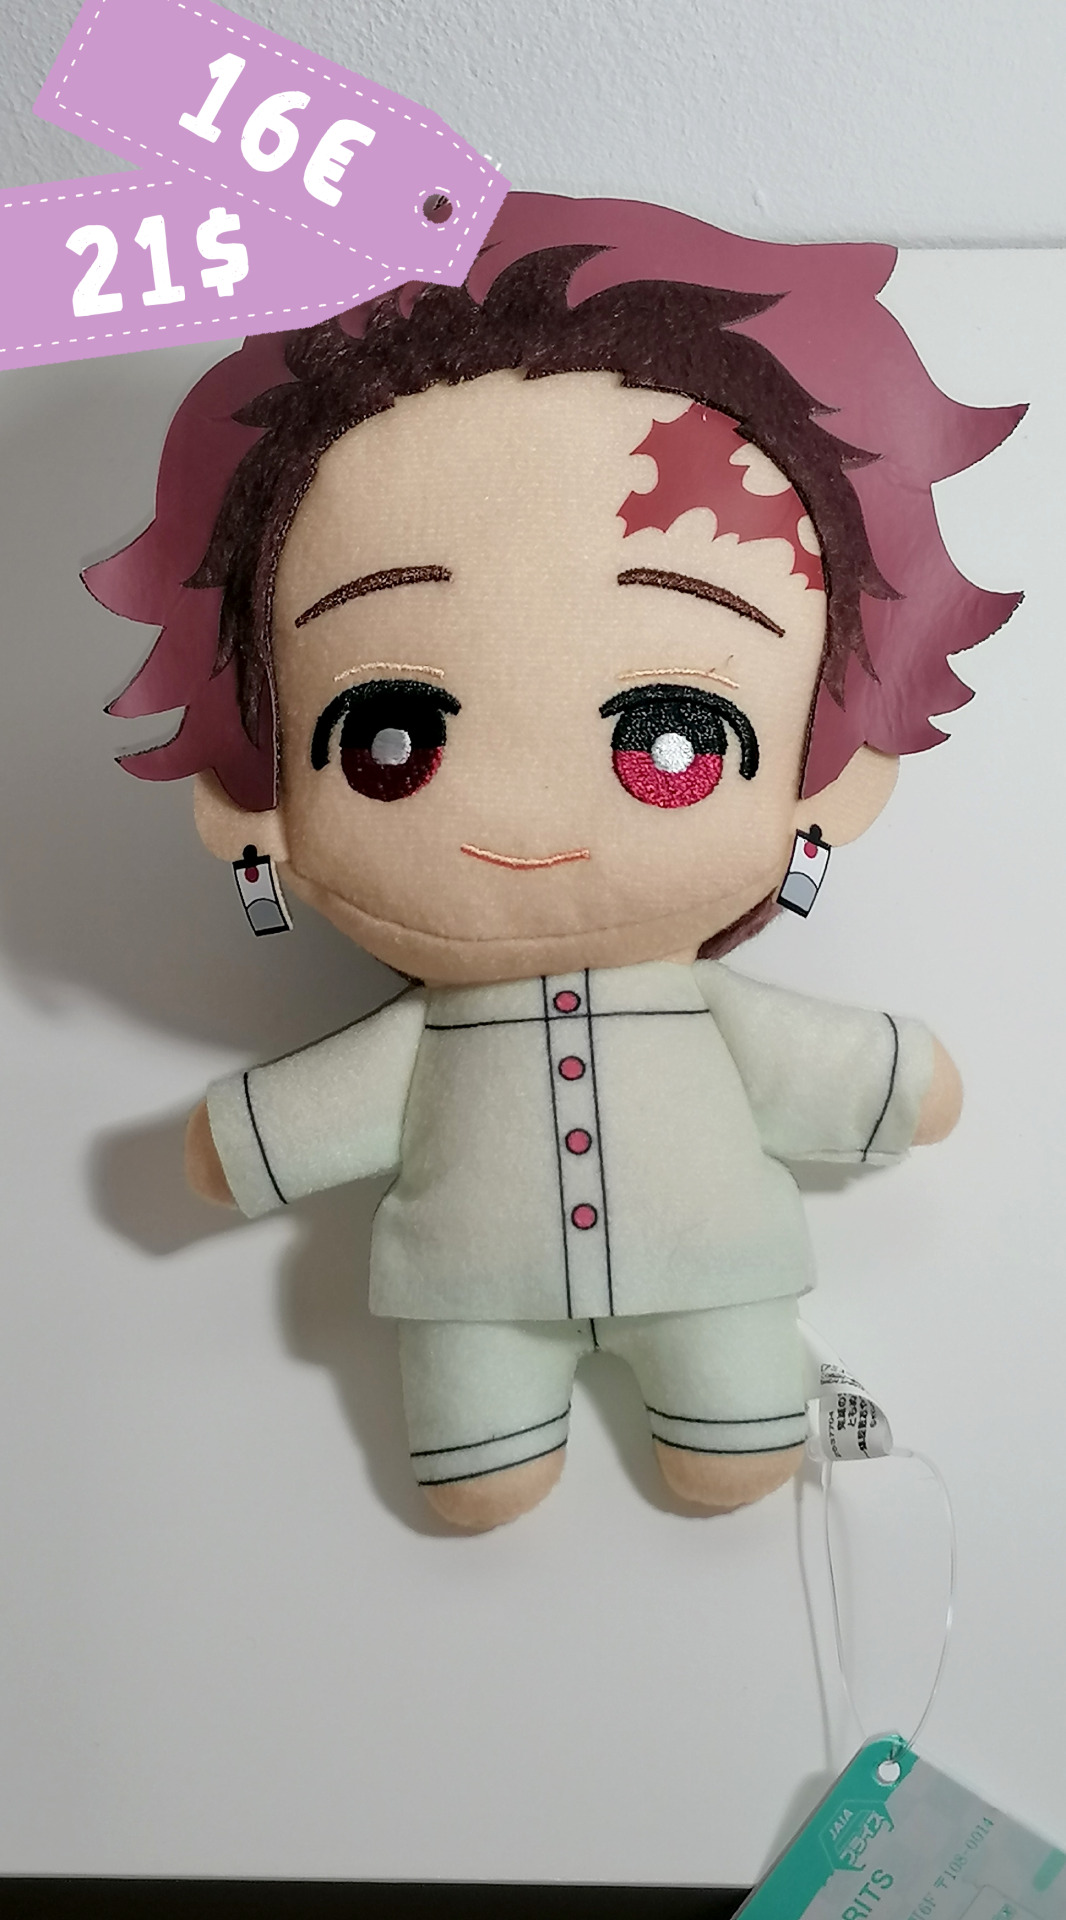 Kimetsu no Yaiba: Kamado    Tanjiro - Tomonui Plush ~ Butterfly House Good Night ver. ~ Size: 20cmPrice: 16€/21USD (Shipping price not included)Units Available: 1(Send us a message or comment if you’re interested!!) #demon slayer #Kimetsu no Yaiba #kamado tanjiro#tanjiro#kny#dms#tanjiro kamado#kimetsu tanjiro#tanjiruo#kny tanjirou#anime#anime merch#manga#oneeesanmarket#plushies